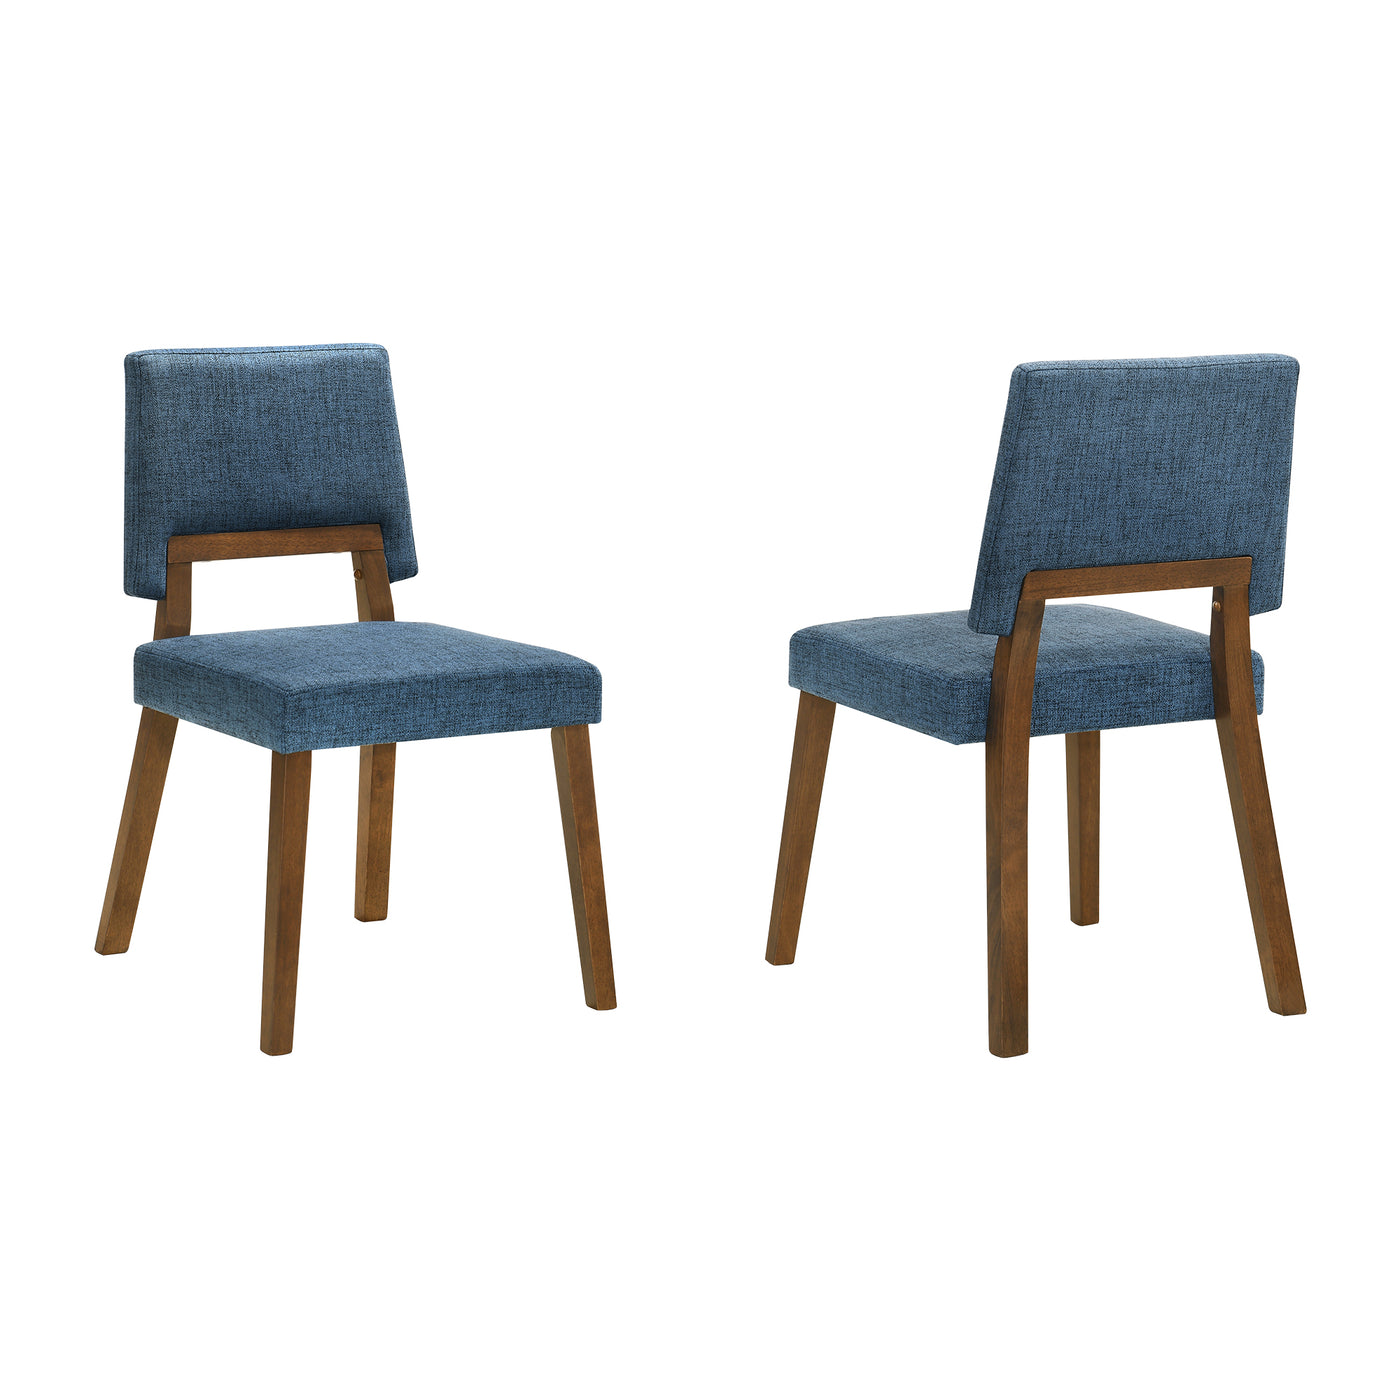 Channell Upholstered Wood Dining Chair - Set of 2